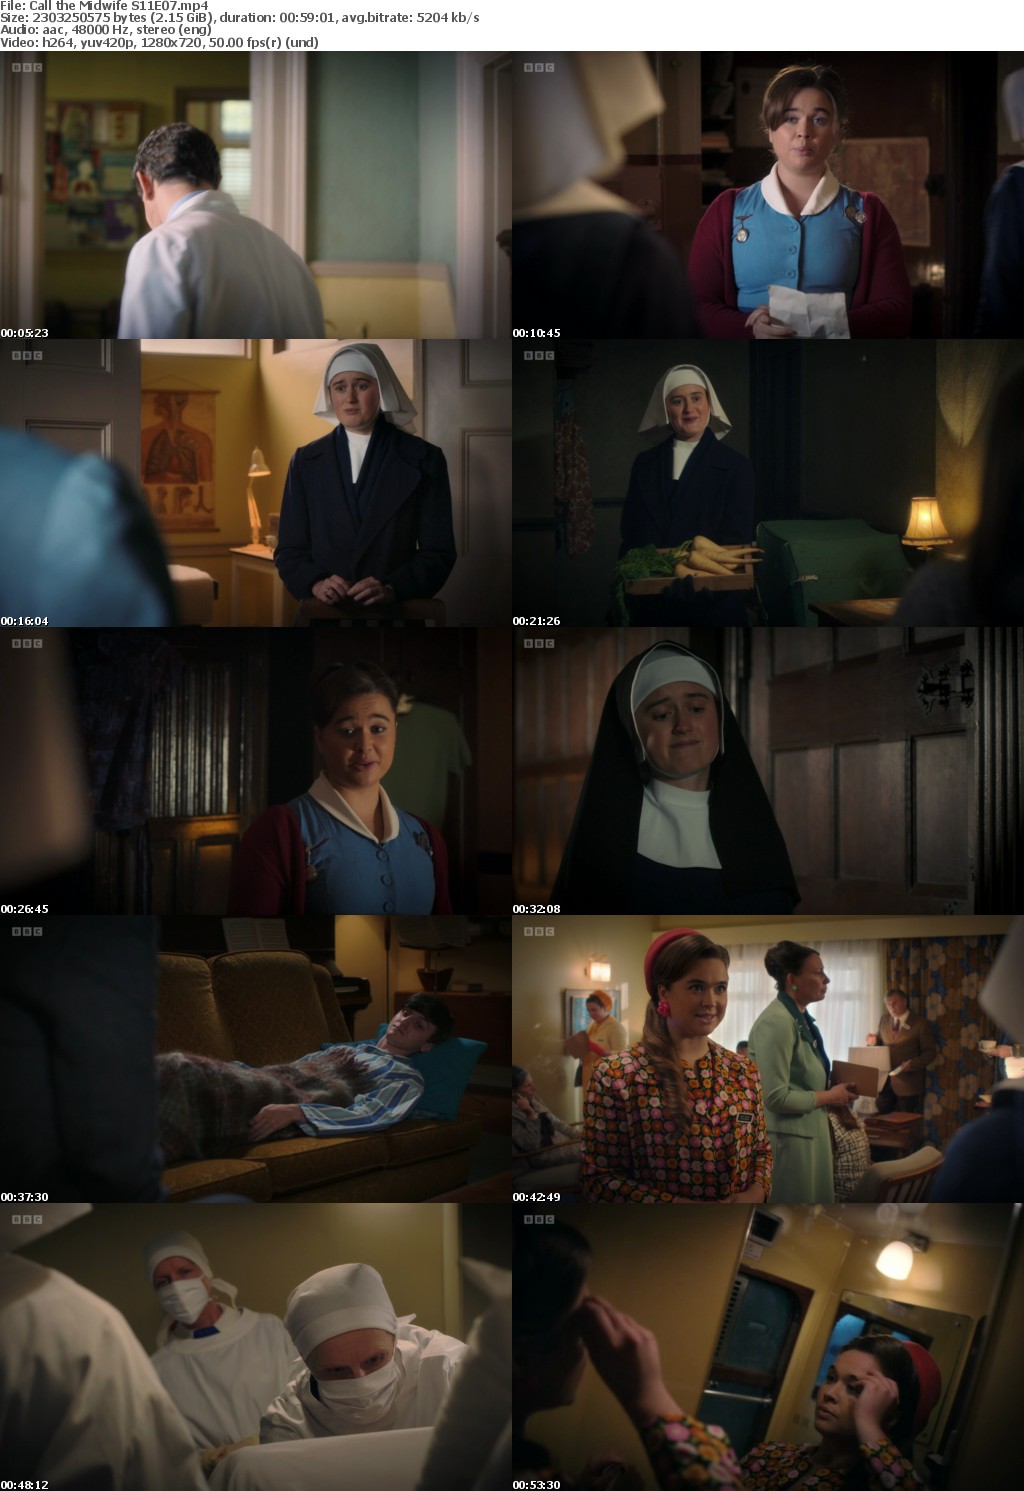 Call the Midwife S11E07 (1280x720p HD, 50fps, soft Eng subs)